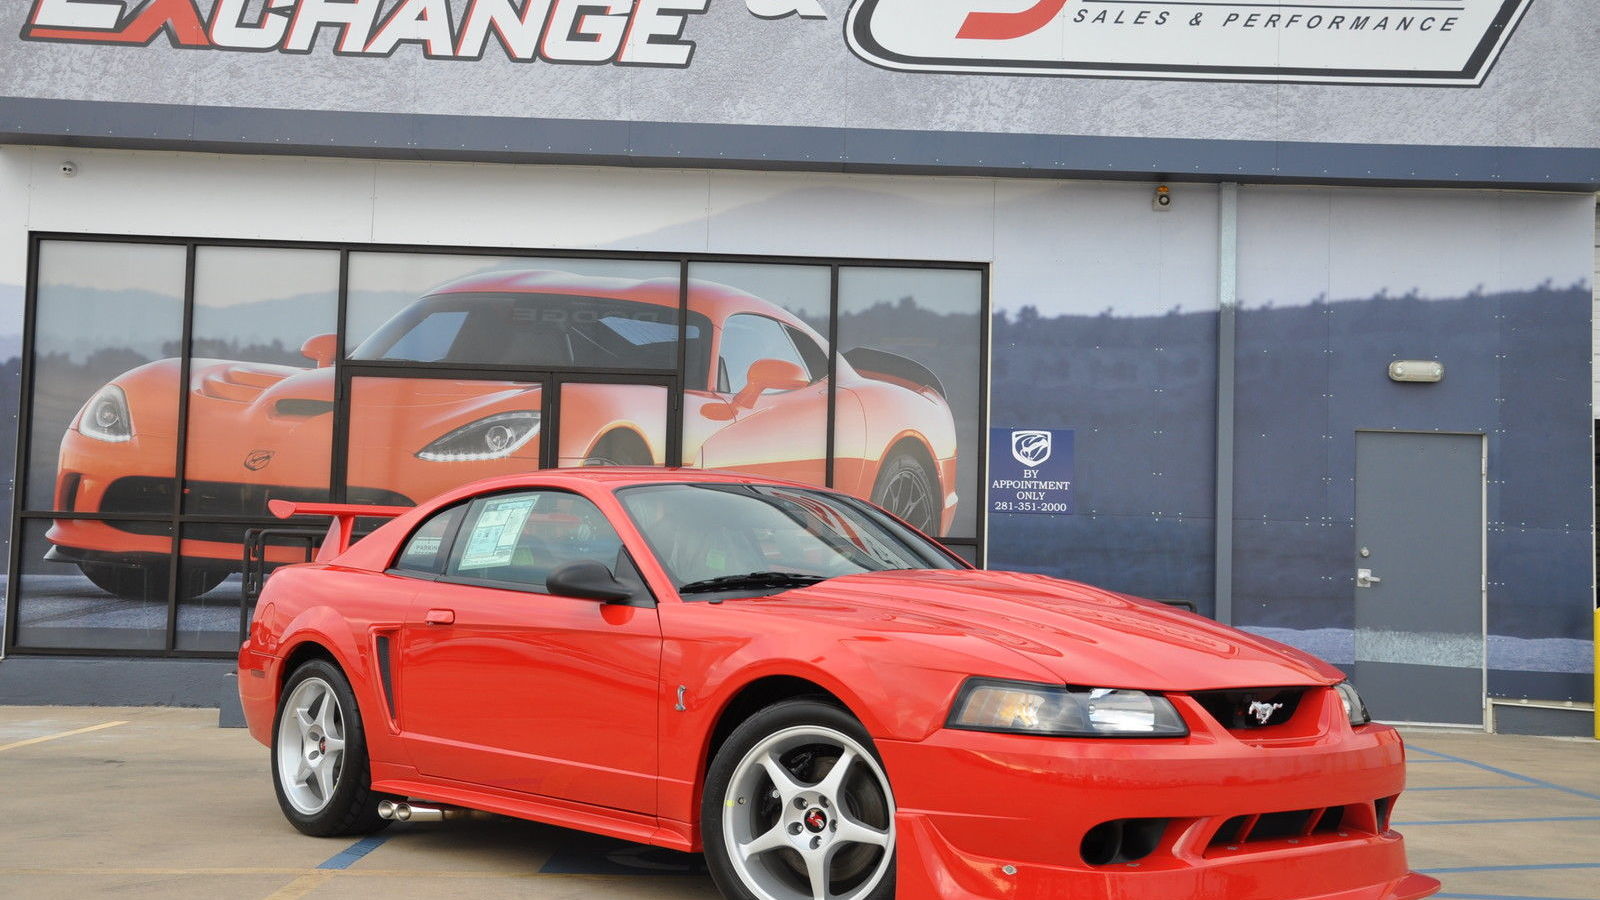 Low mileage 2000 Ford Mustang Cobra R for sale